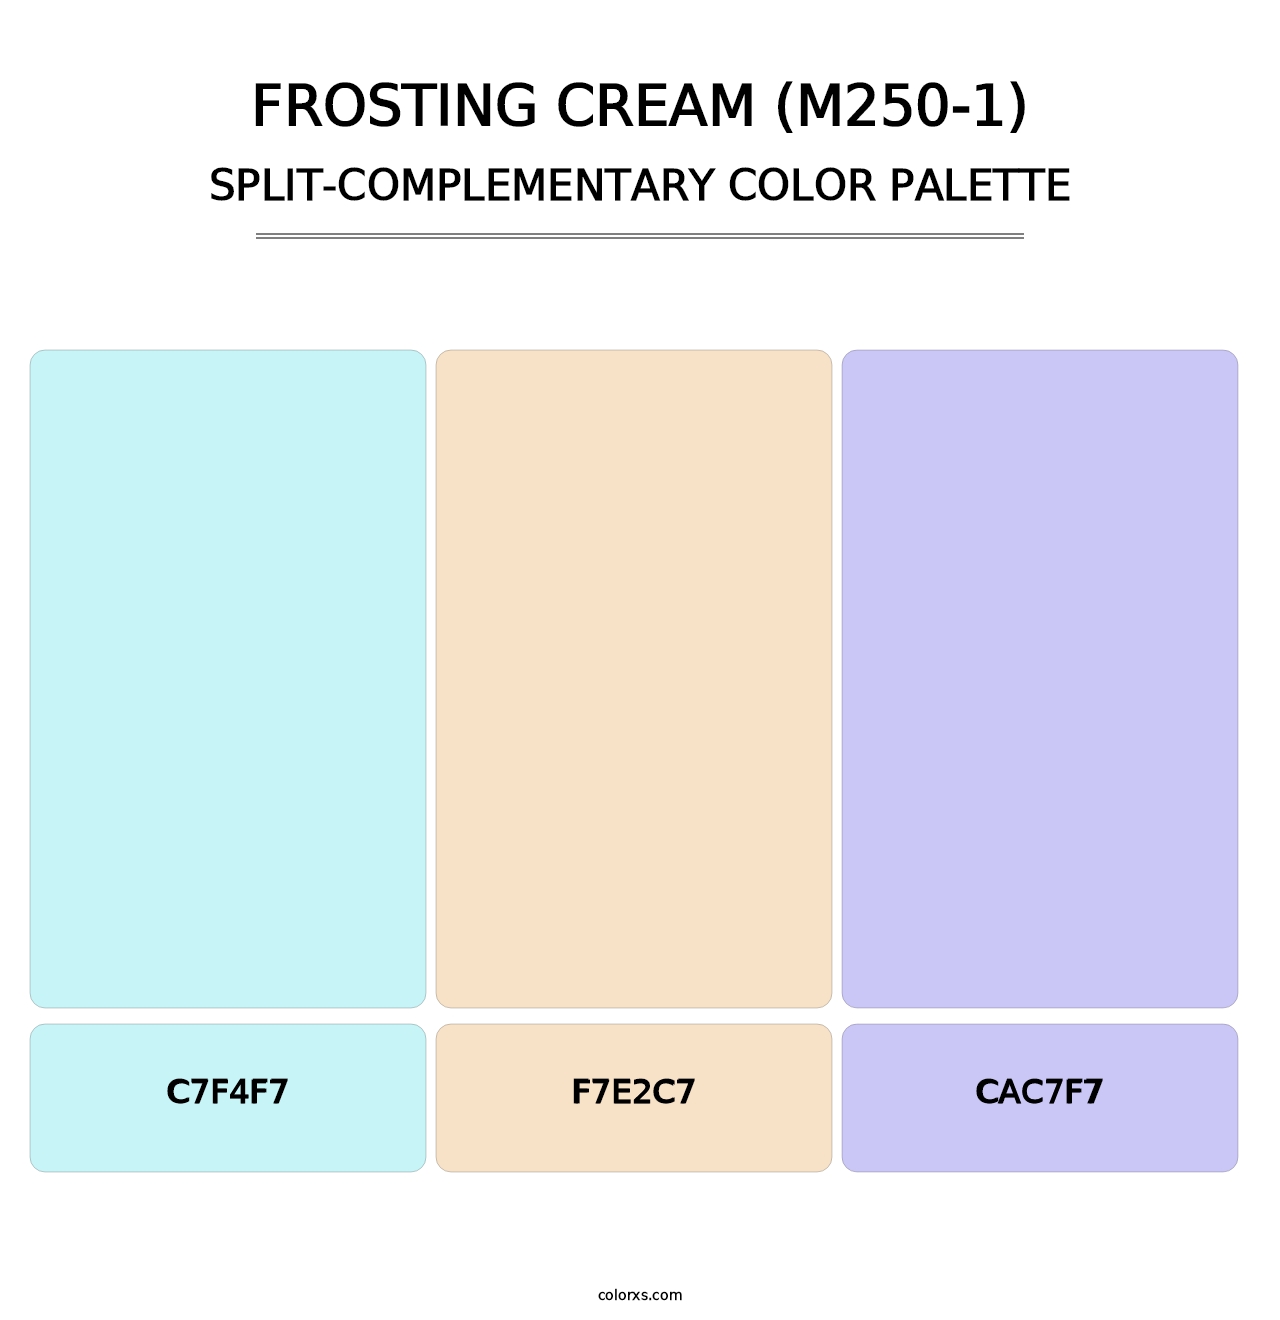 Frosting Cream (M250-1) - Split-Complementary Color Palette